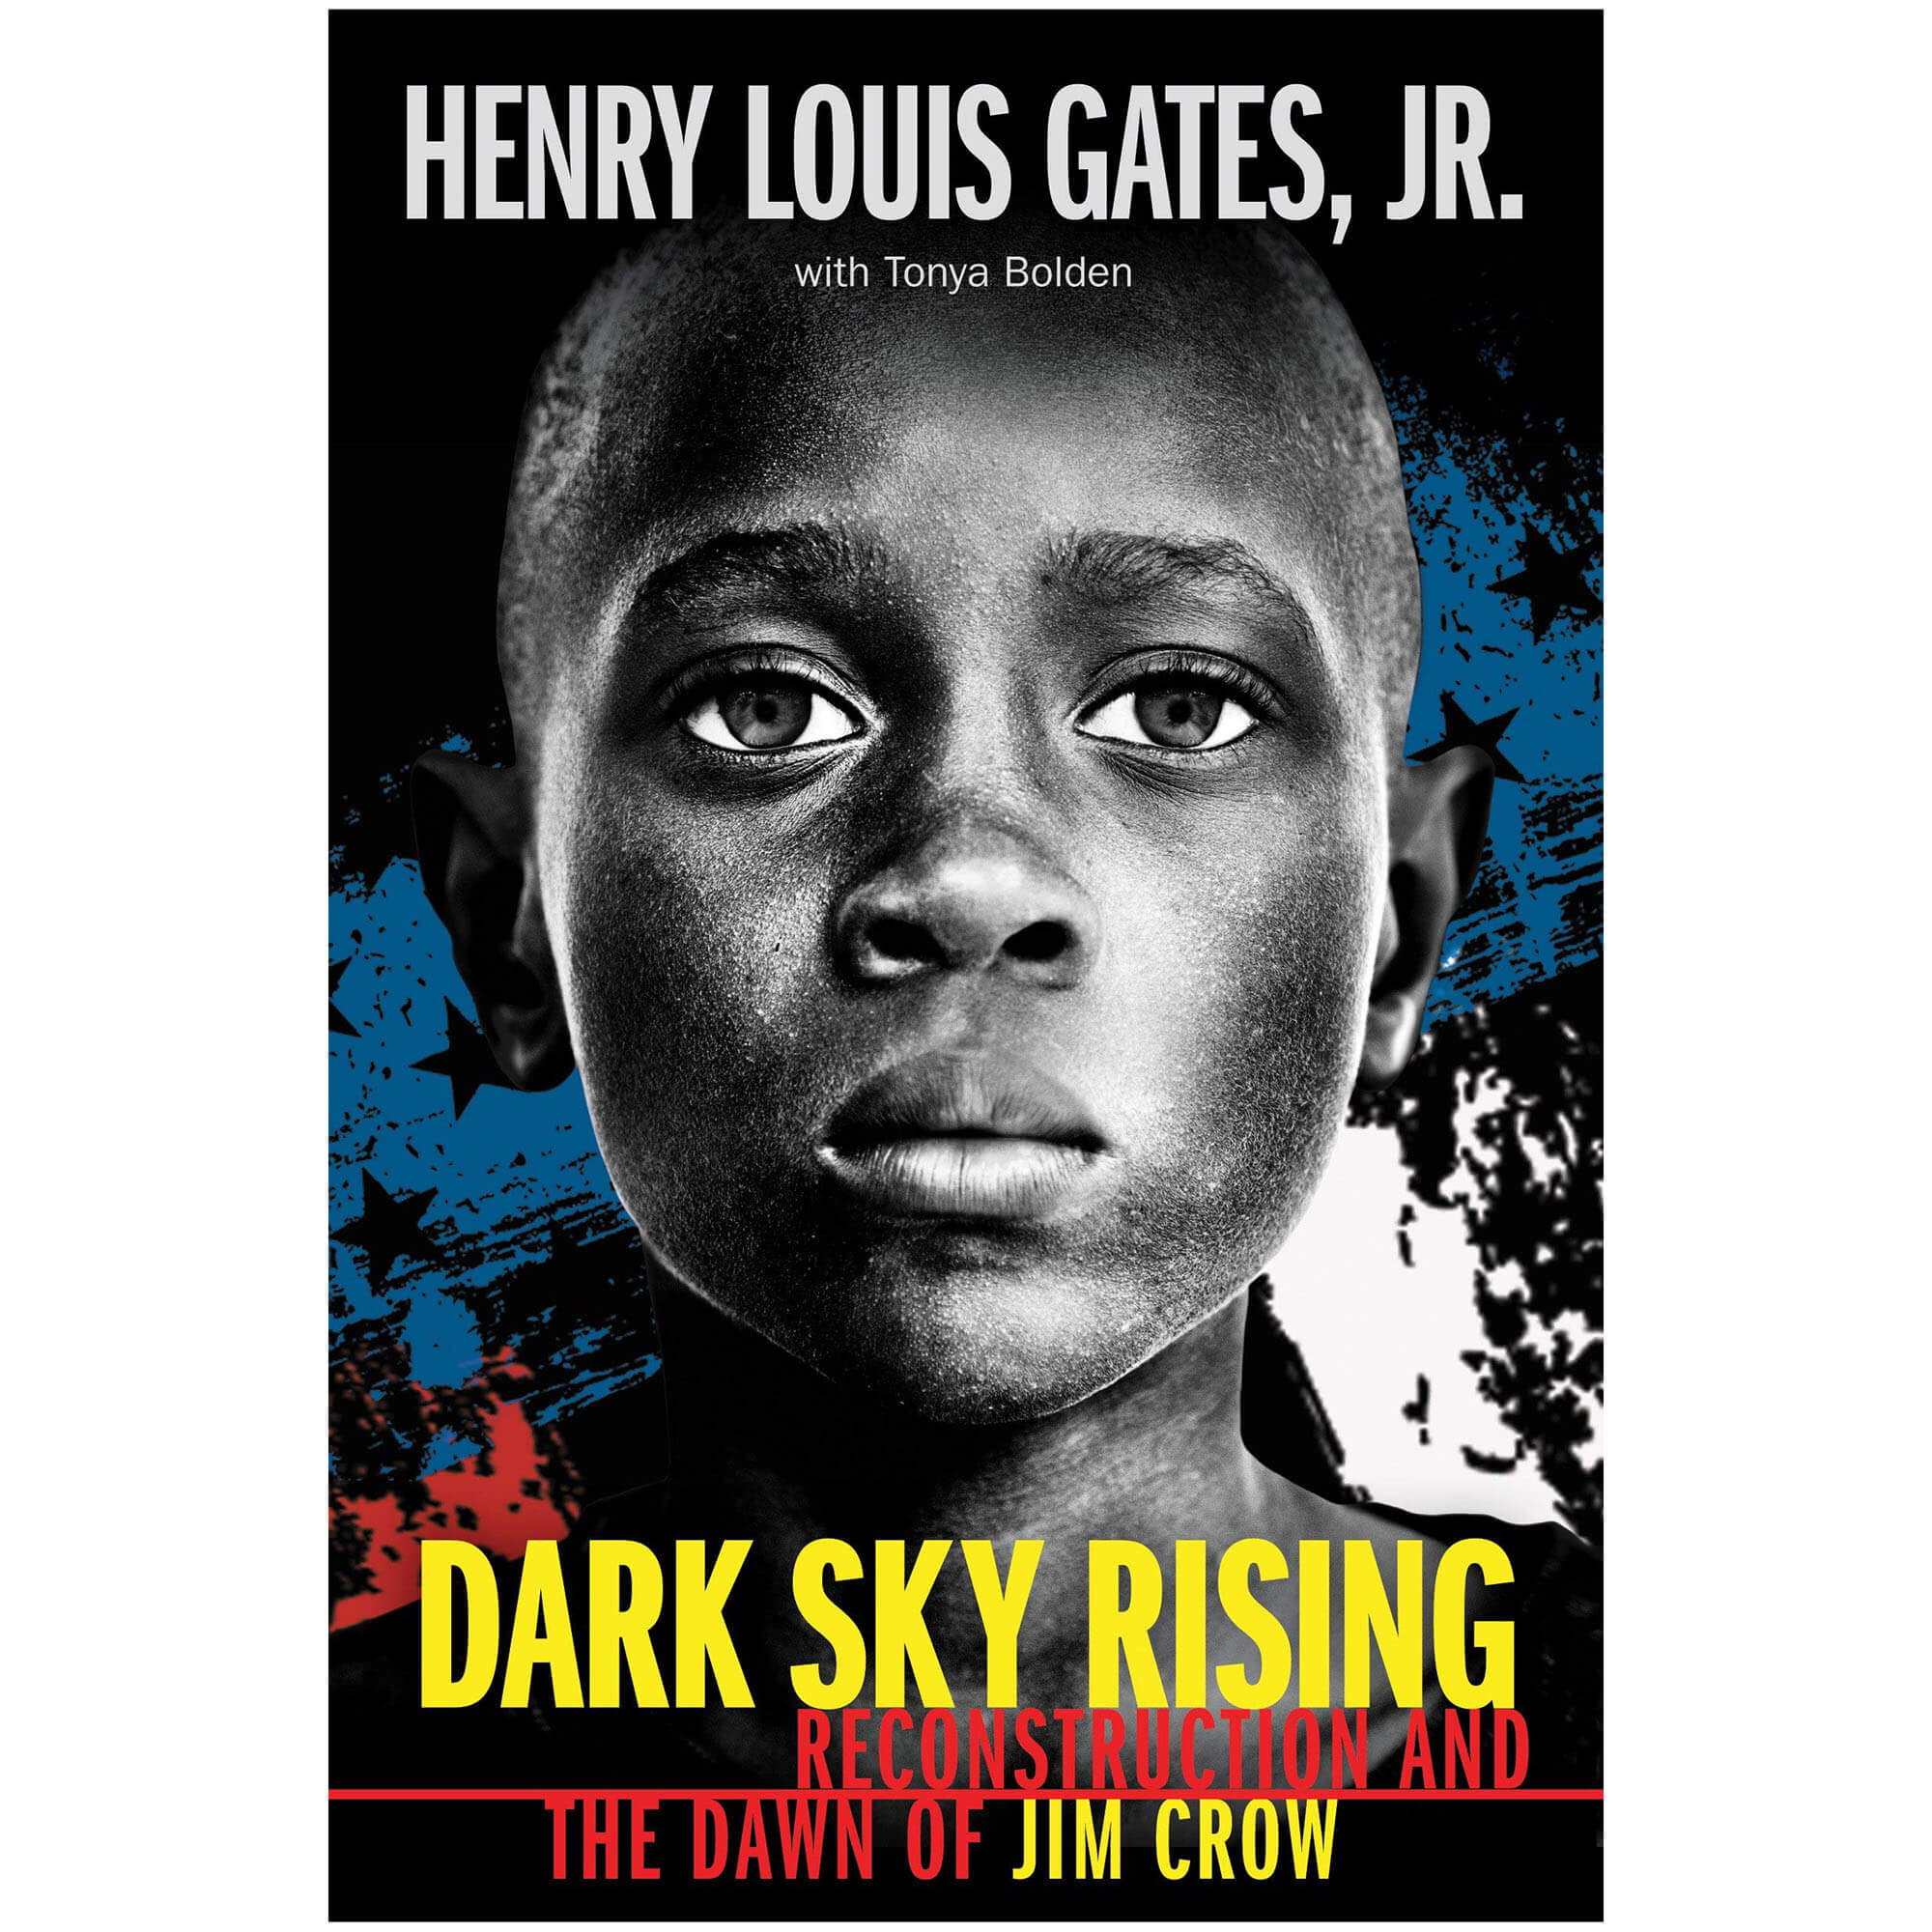 Dark Sky Rising Reconstruction and the Dawn of Jim Crow